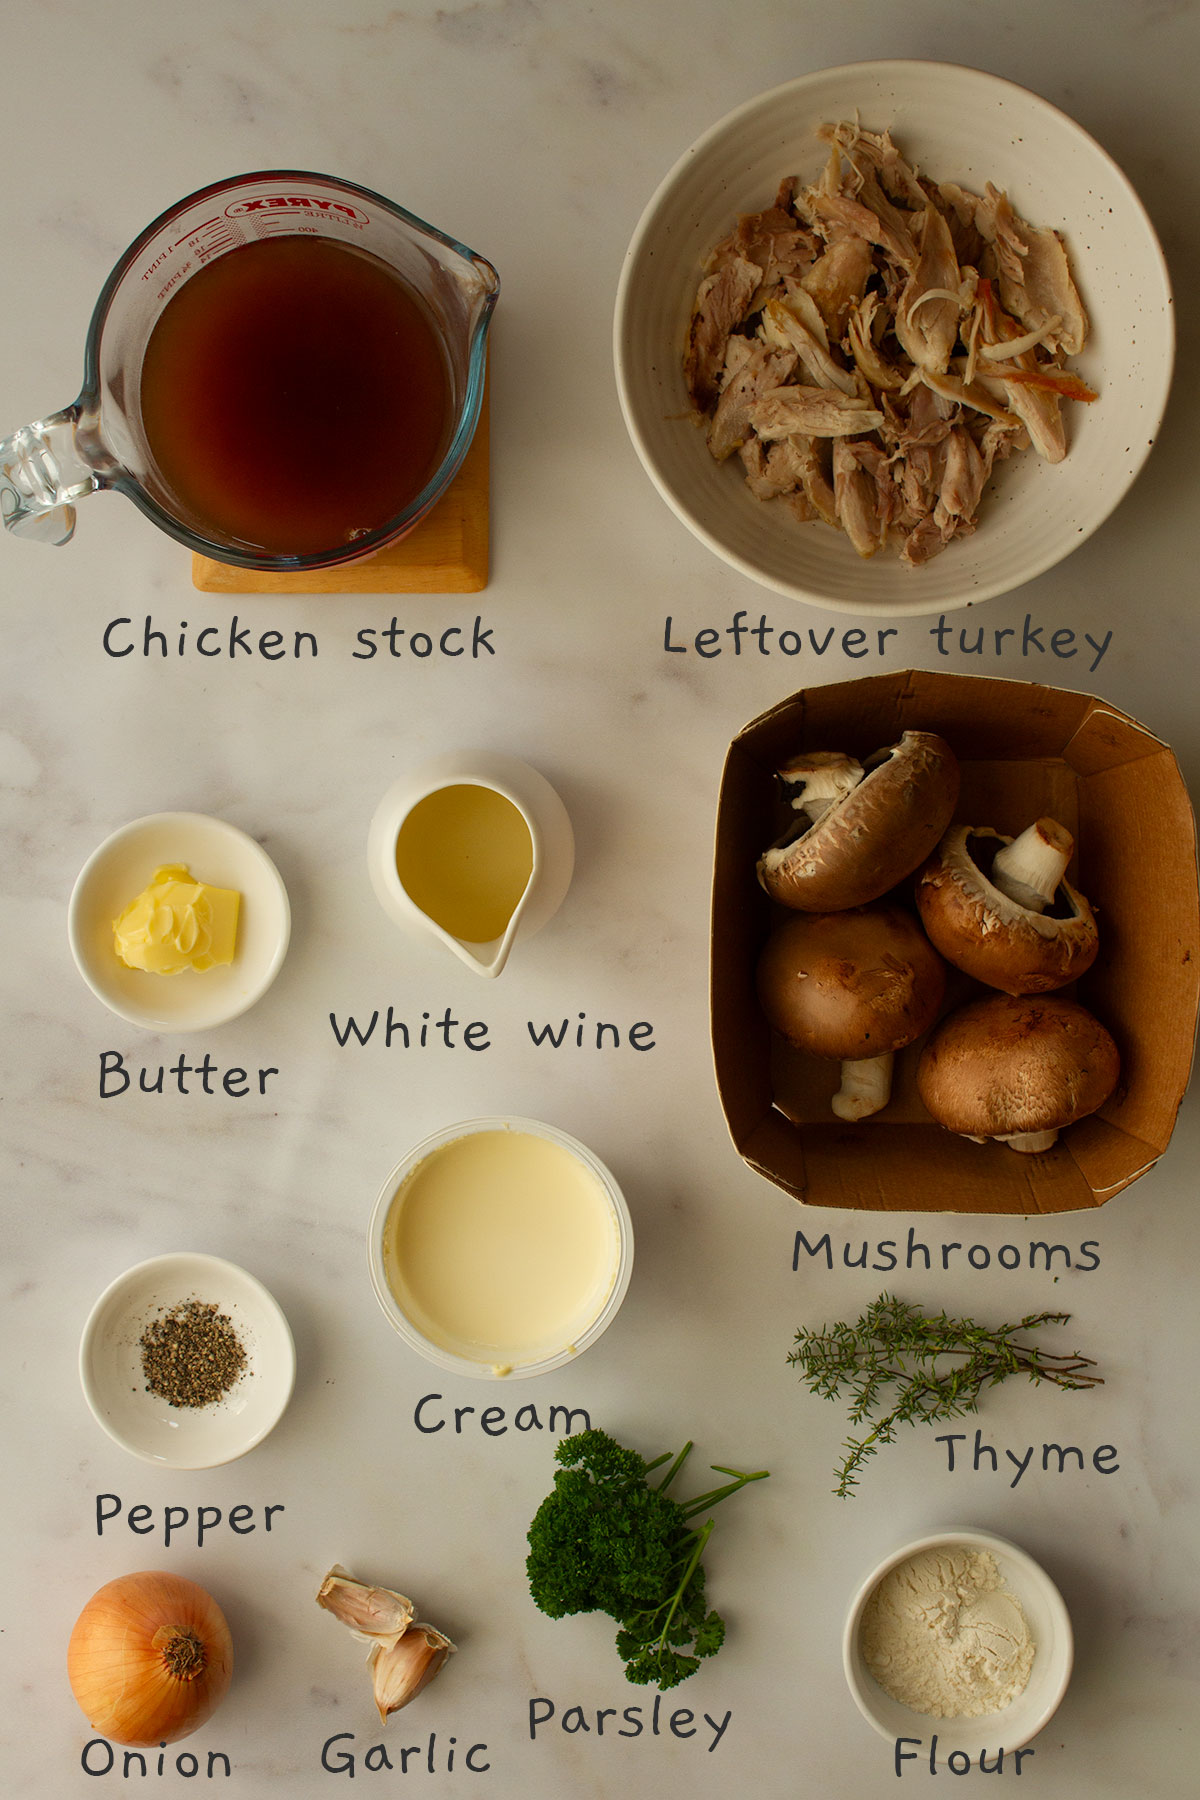 All ingredients laid out on a white background